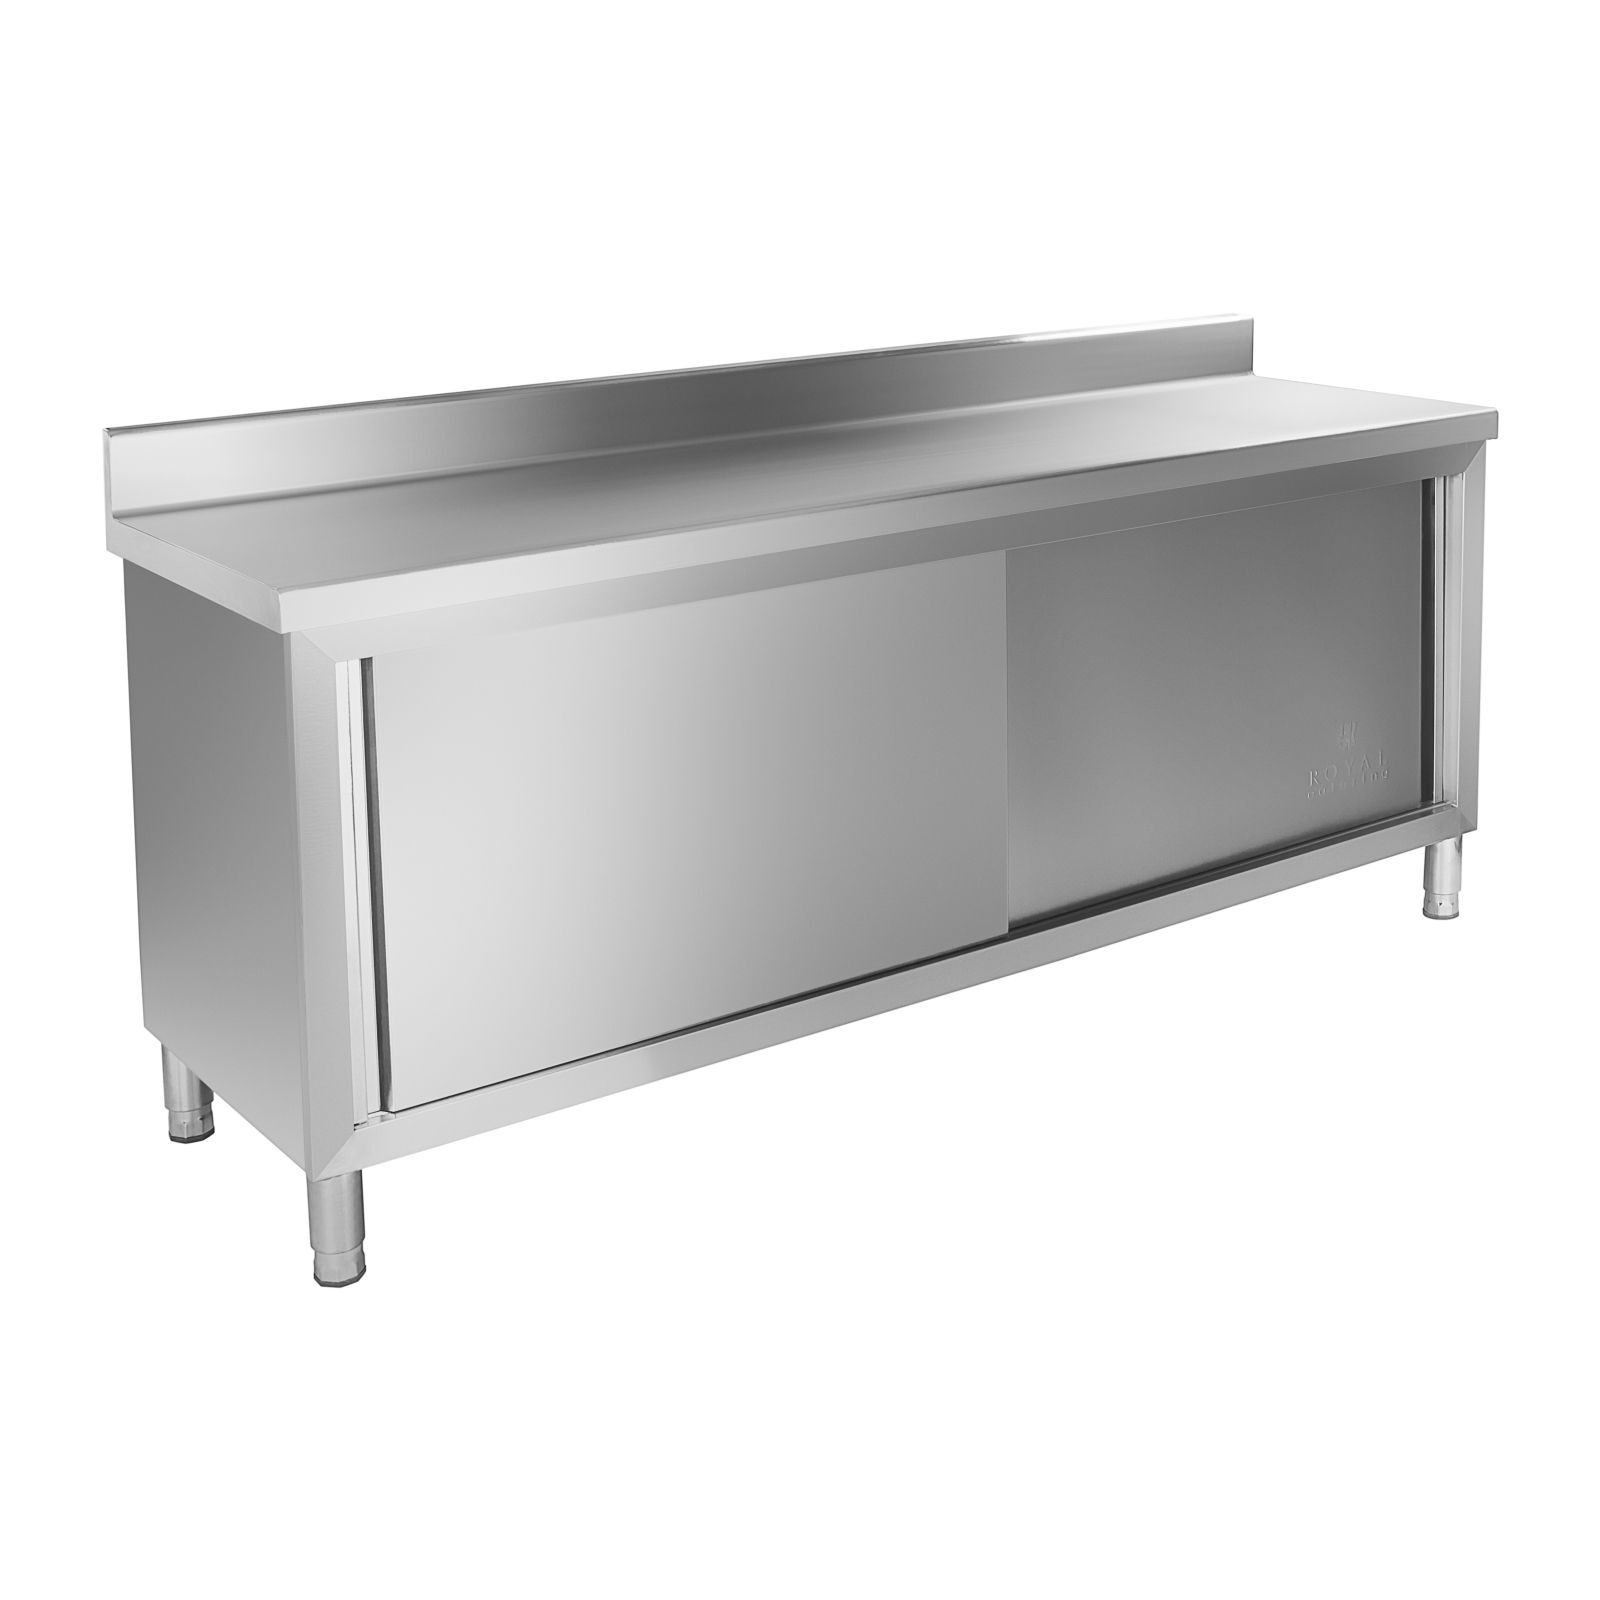 Royal Catering Work cupboard - 200 x 60 cm - Upstand